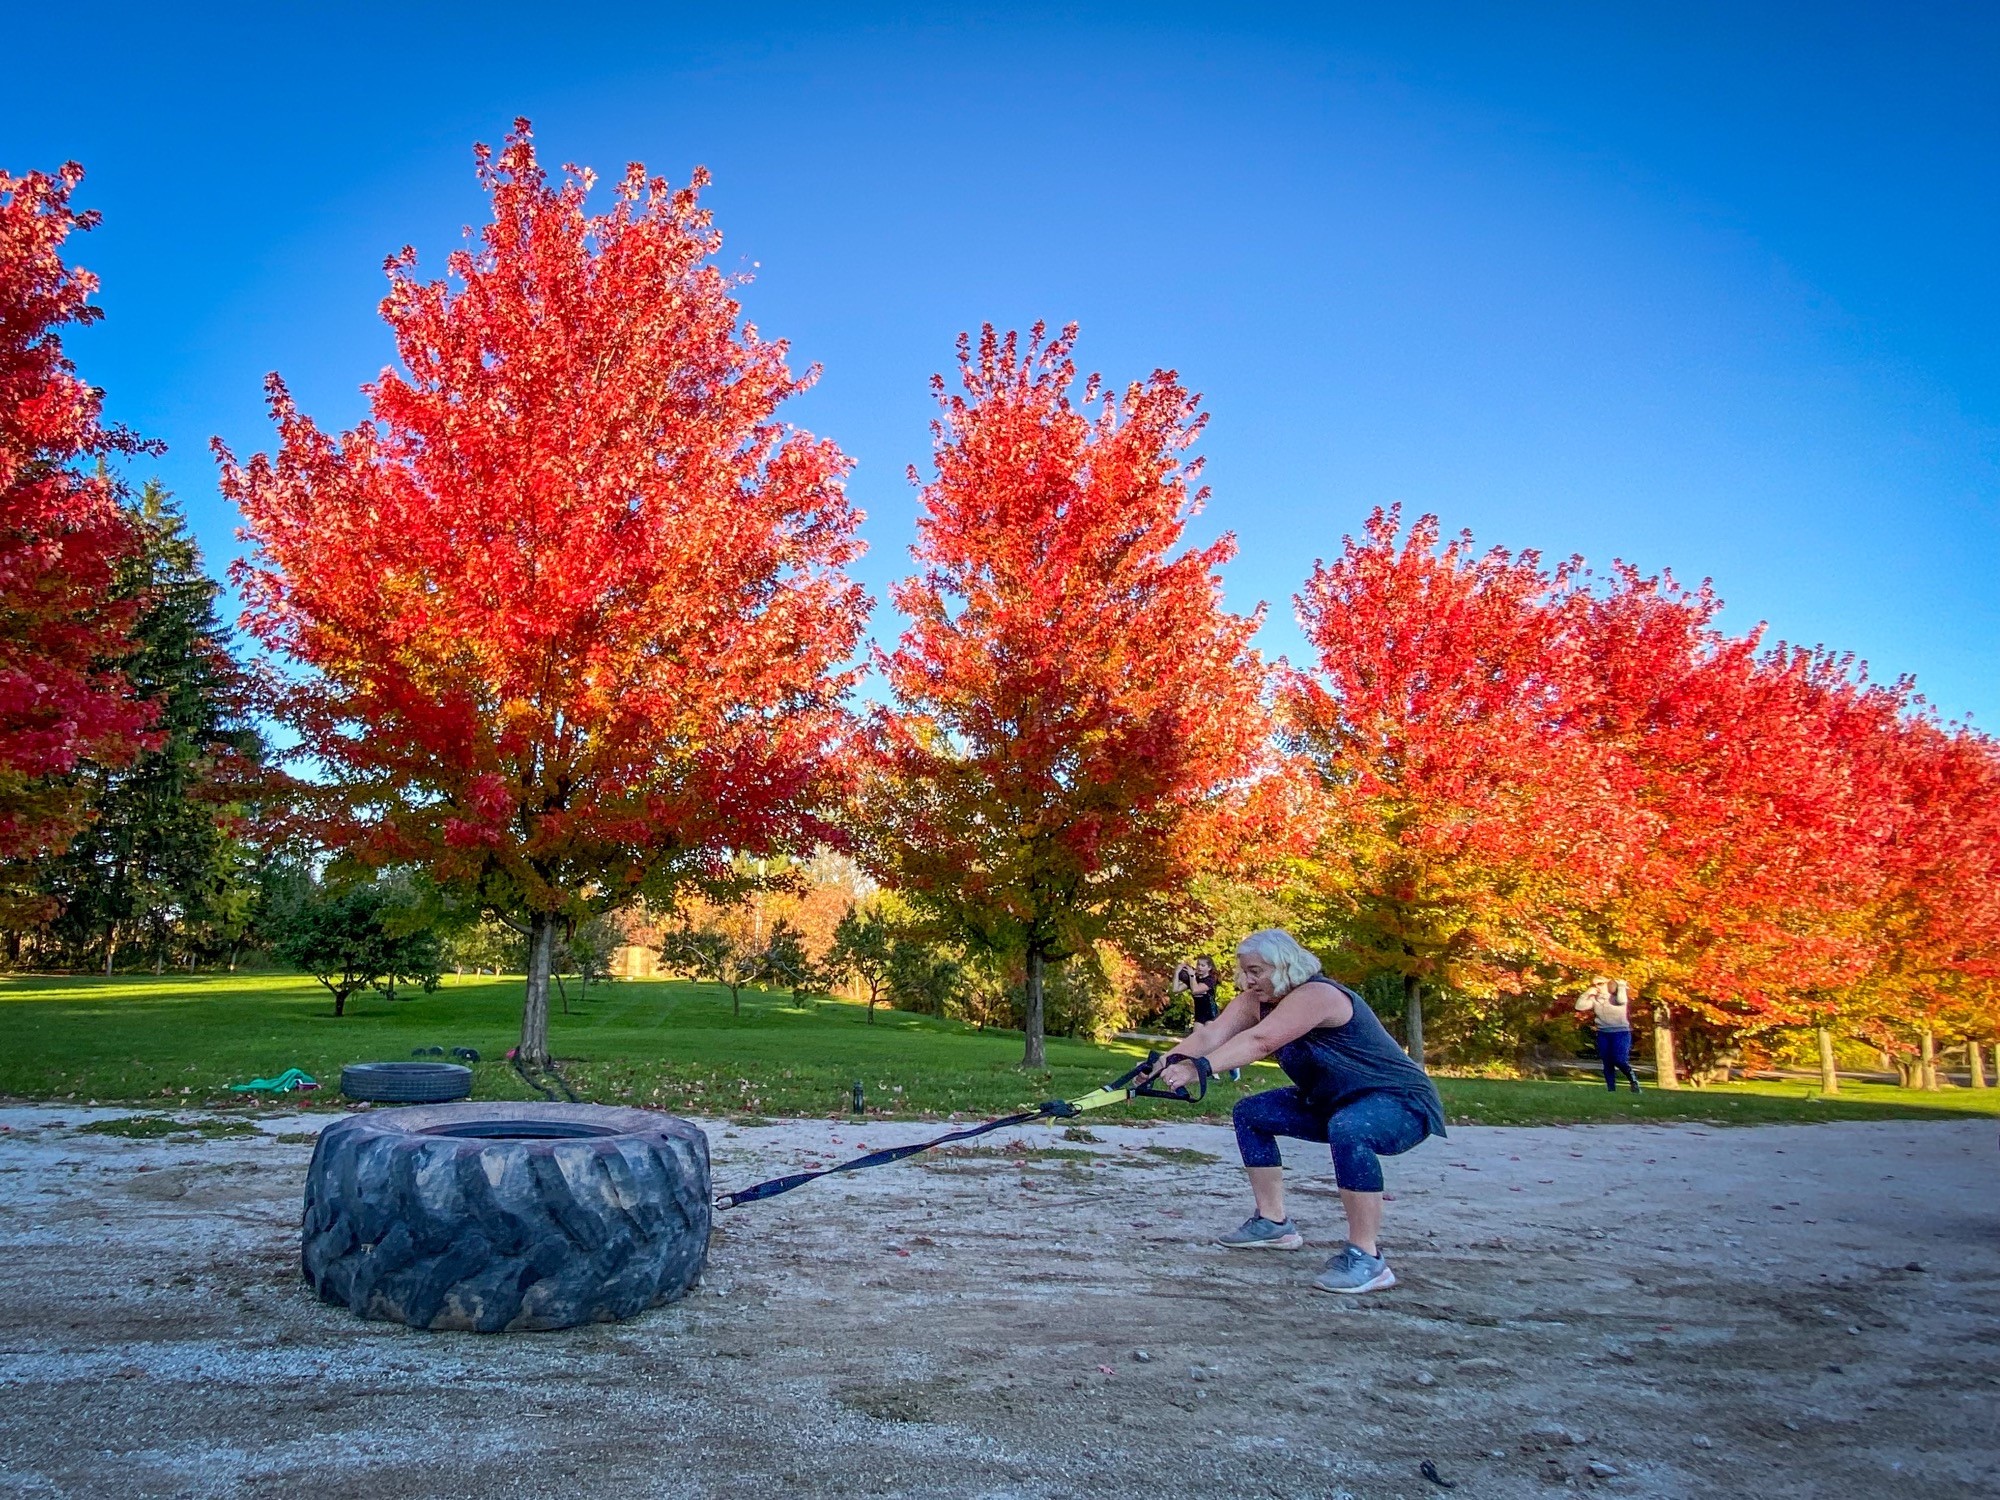 Woman pulling tire with fall leaves in background